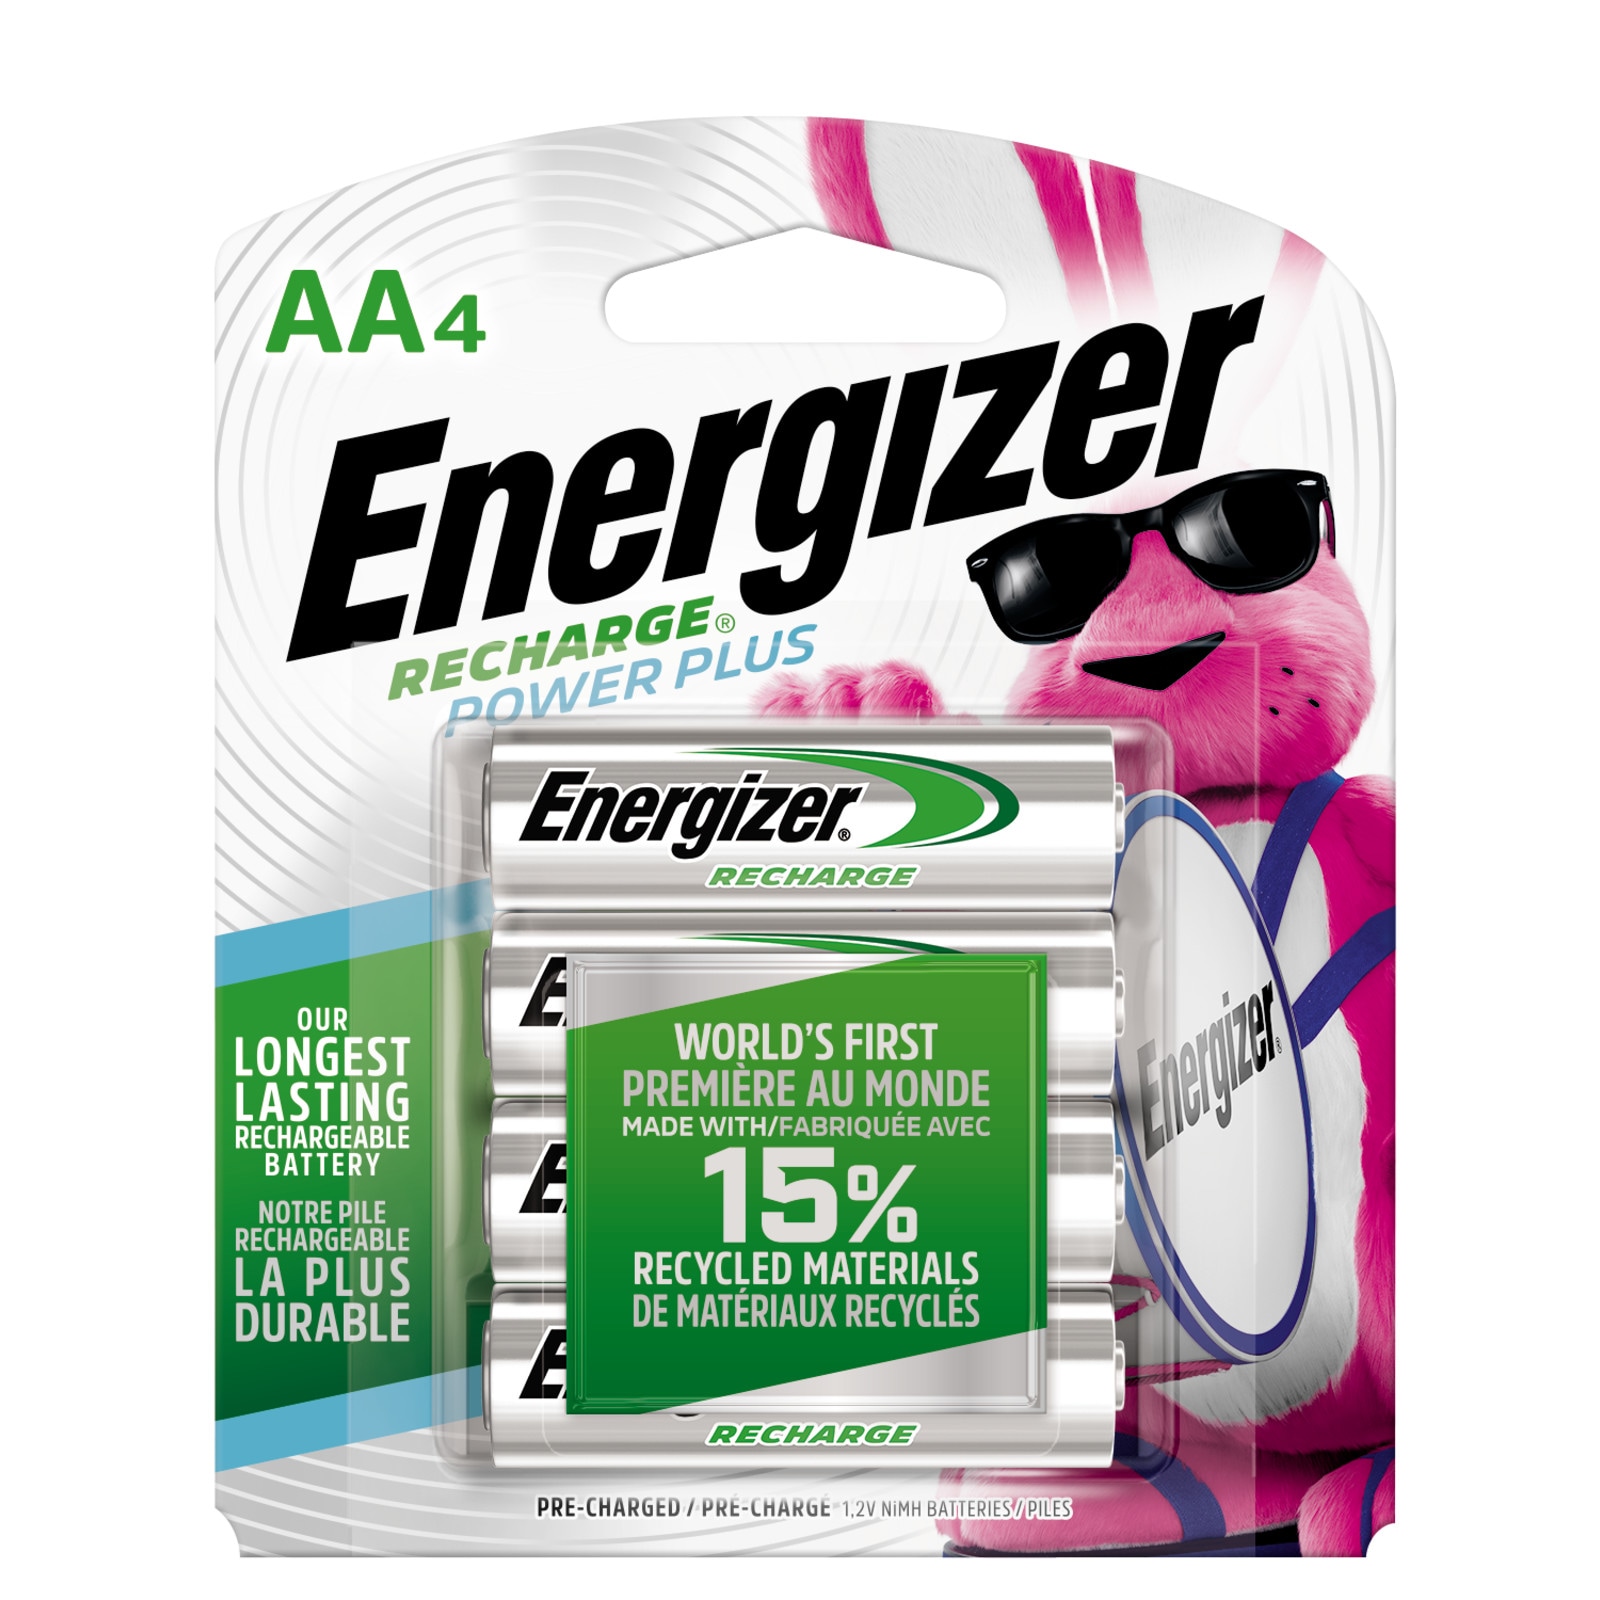 Energizer Base Charger with 4 AA rechargeable Batteries included